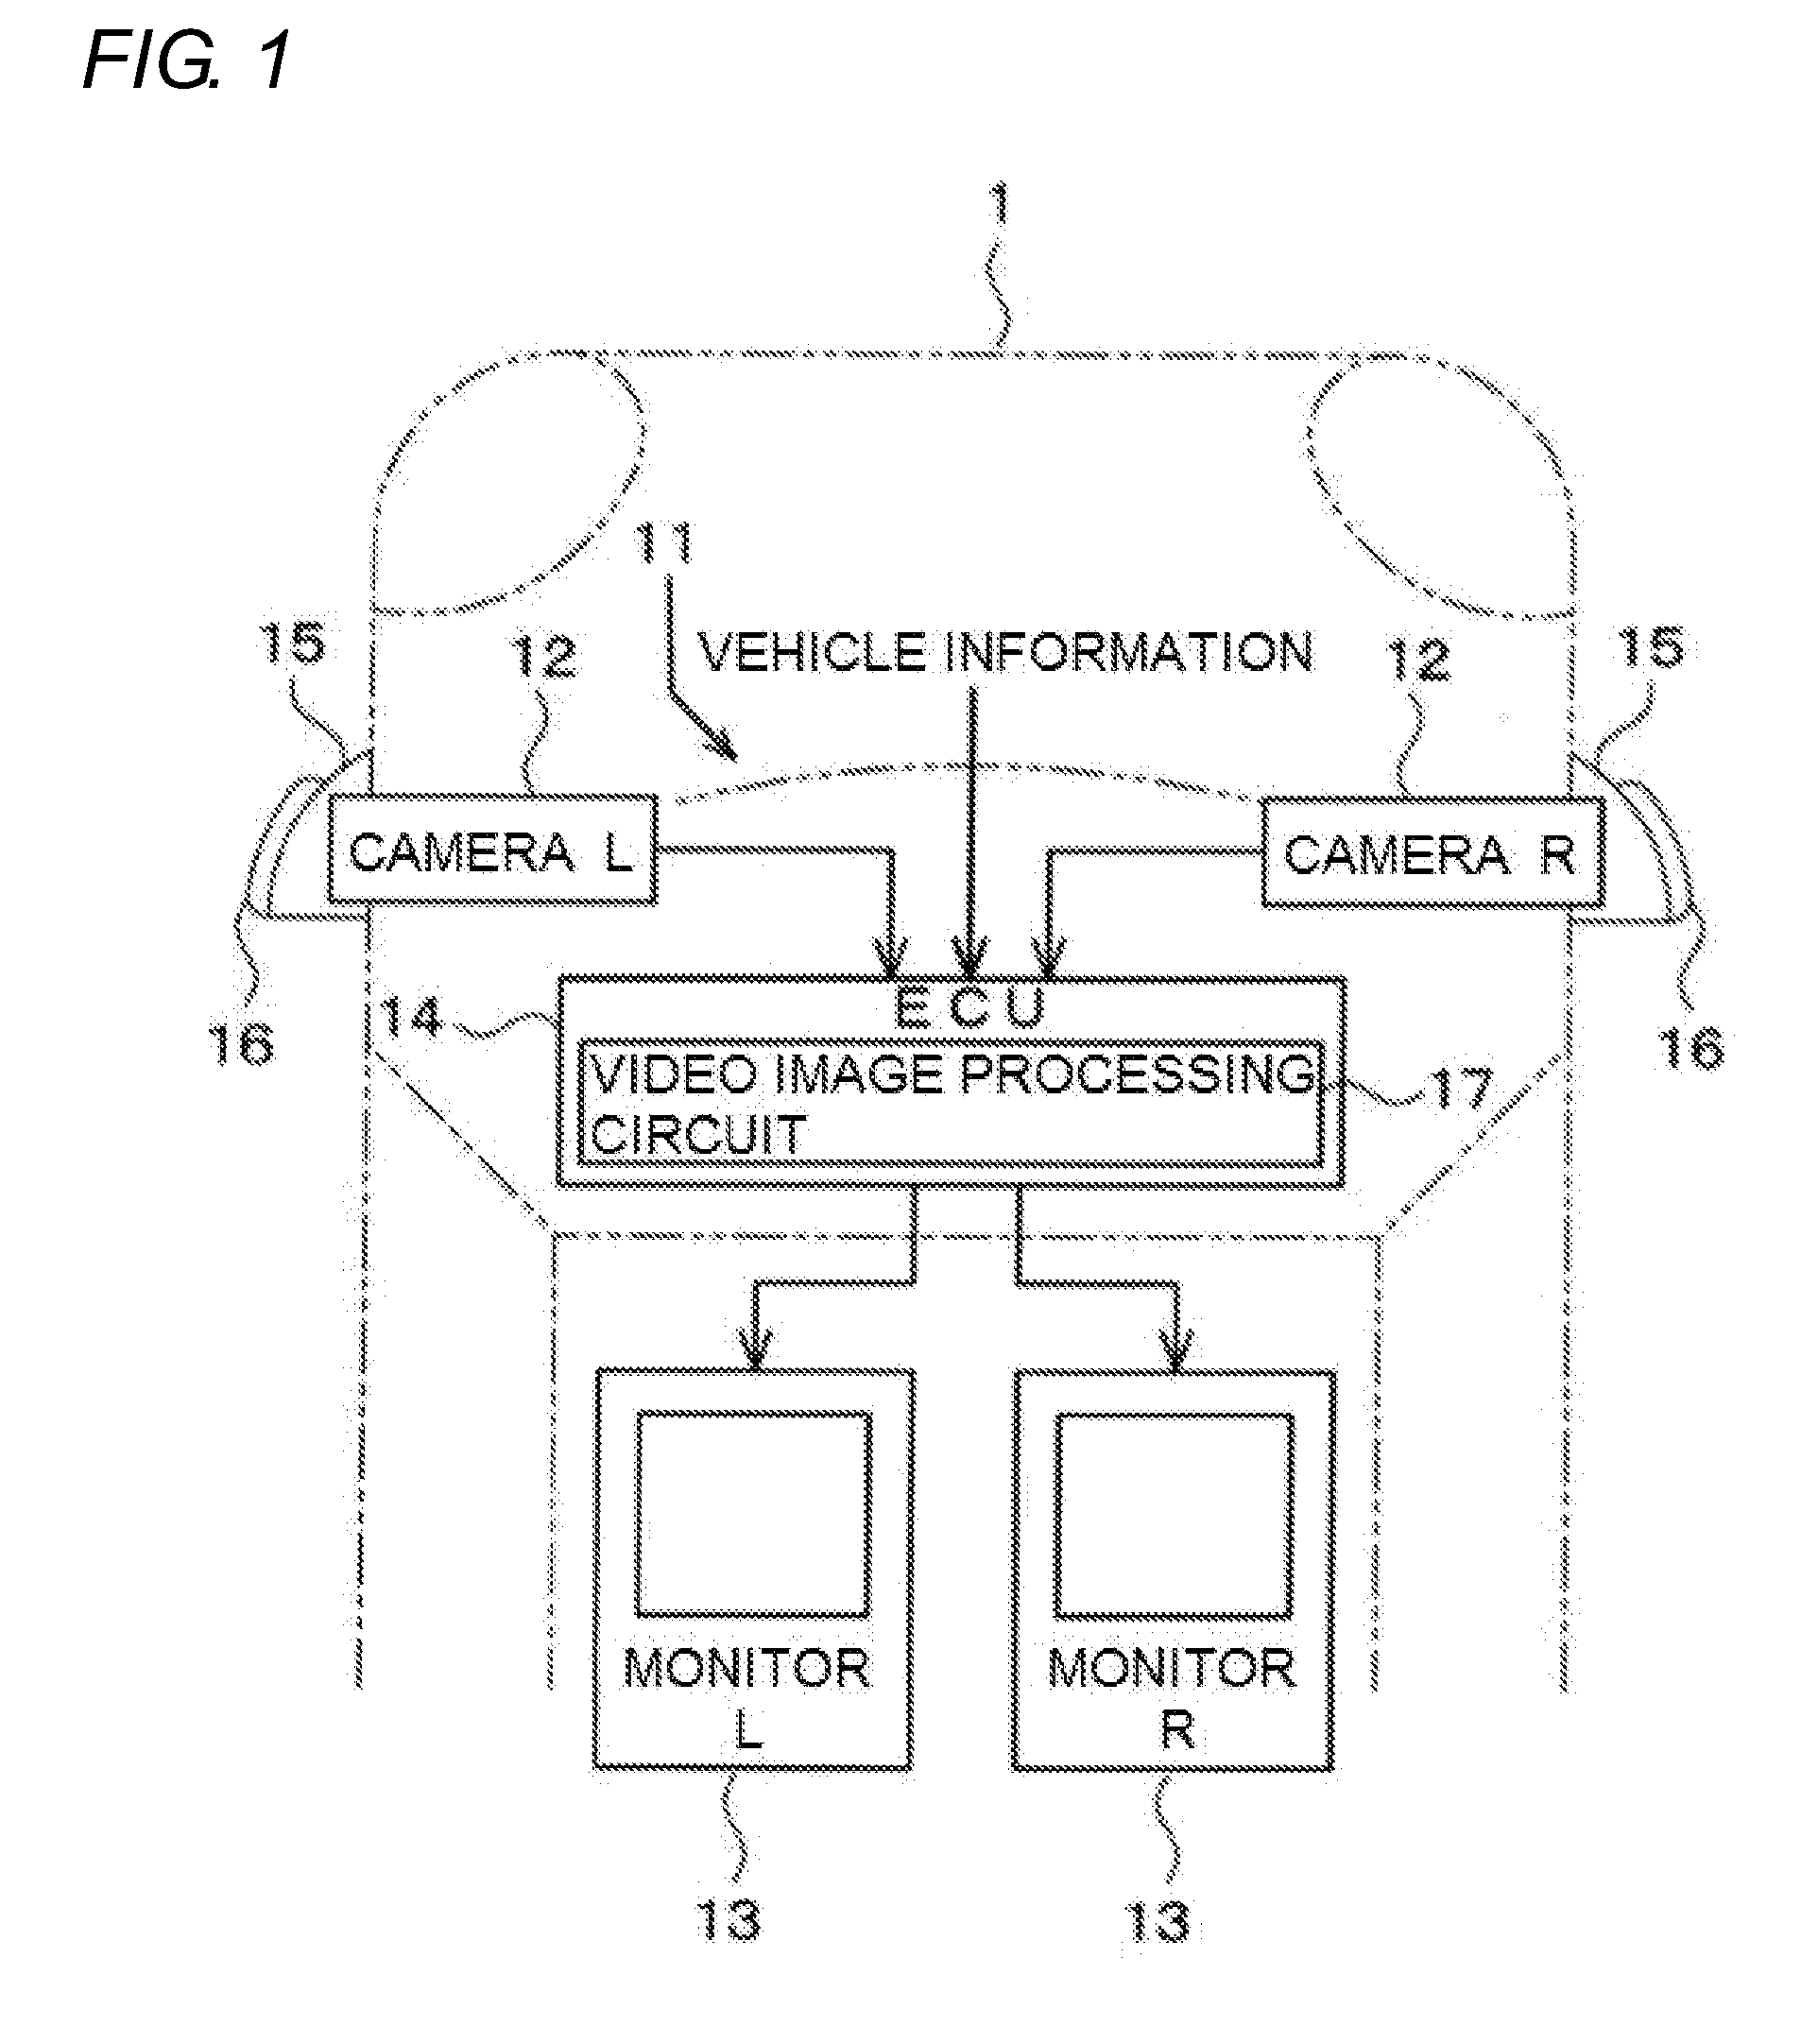 Electronic control unit and in-vehicle video system